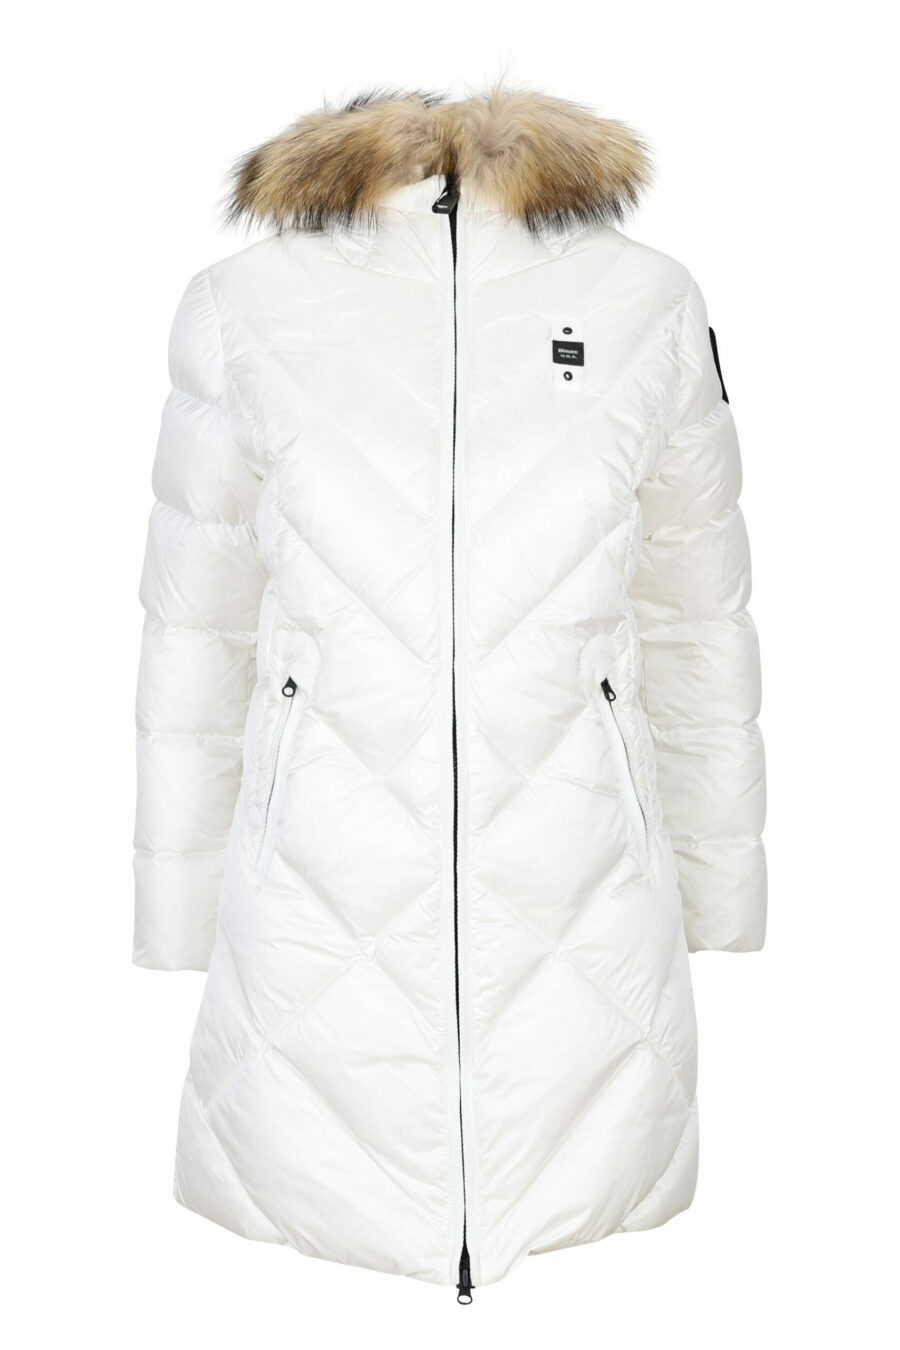 White waterproof hooded jacket with fur hood and diagonal lines with beige lining - 8058610650896 scaled